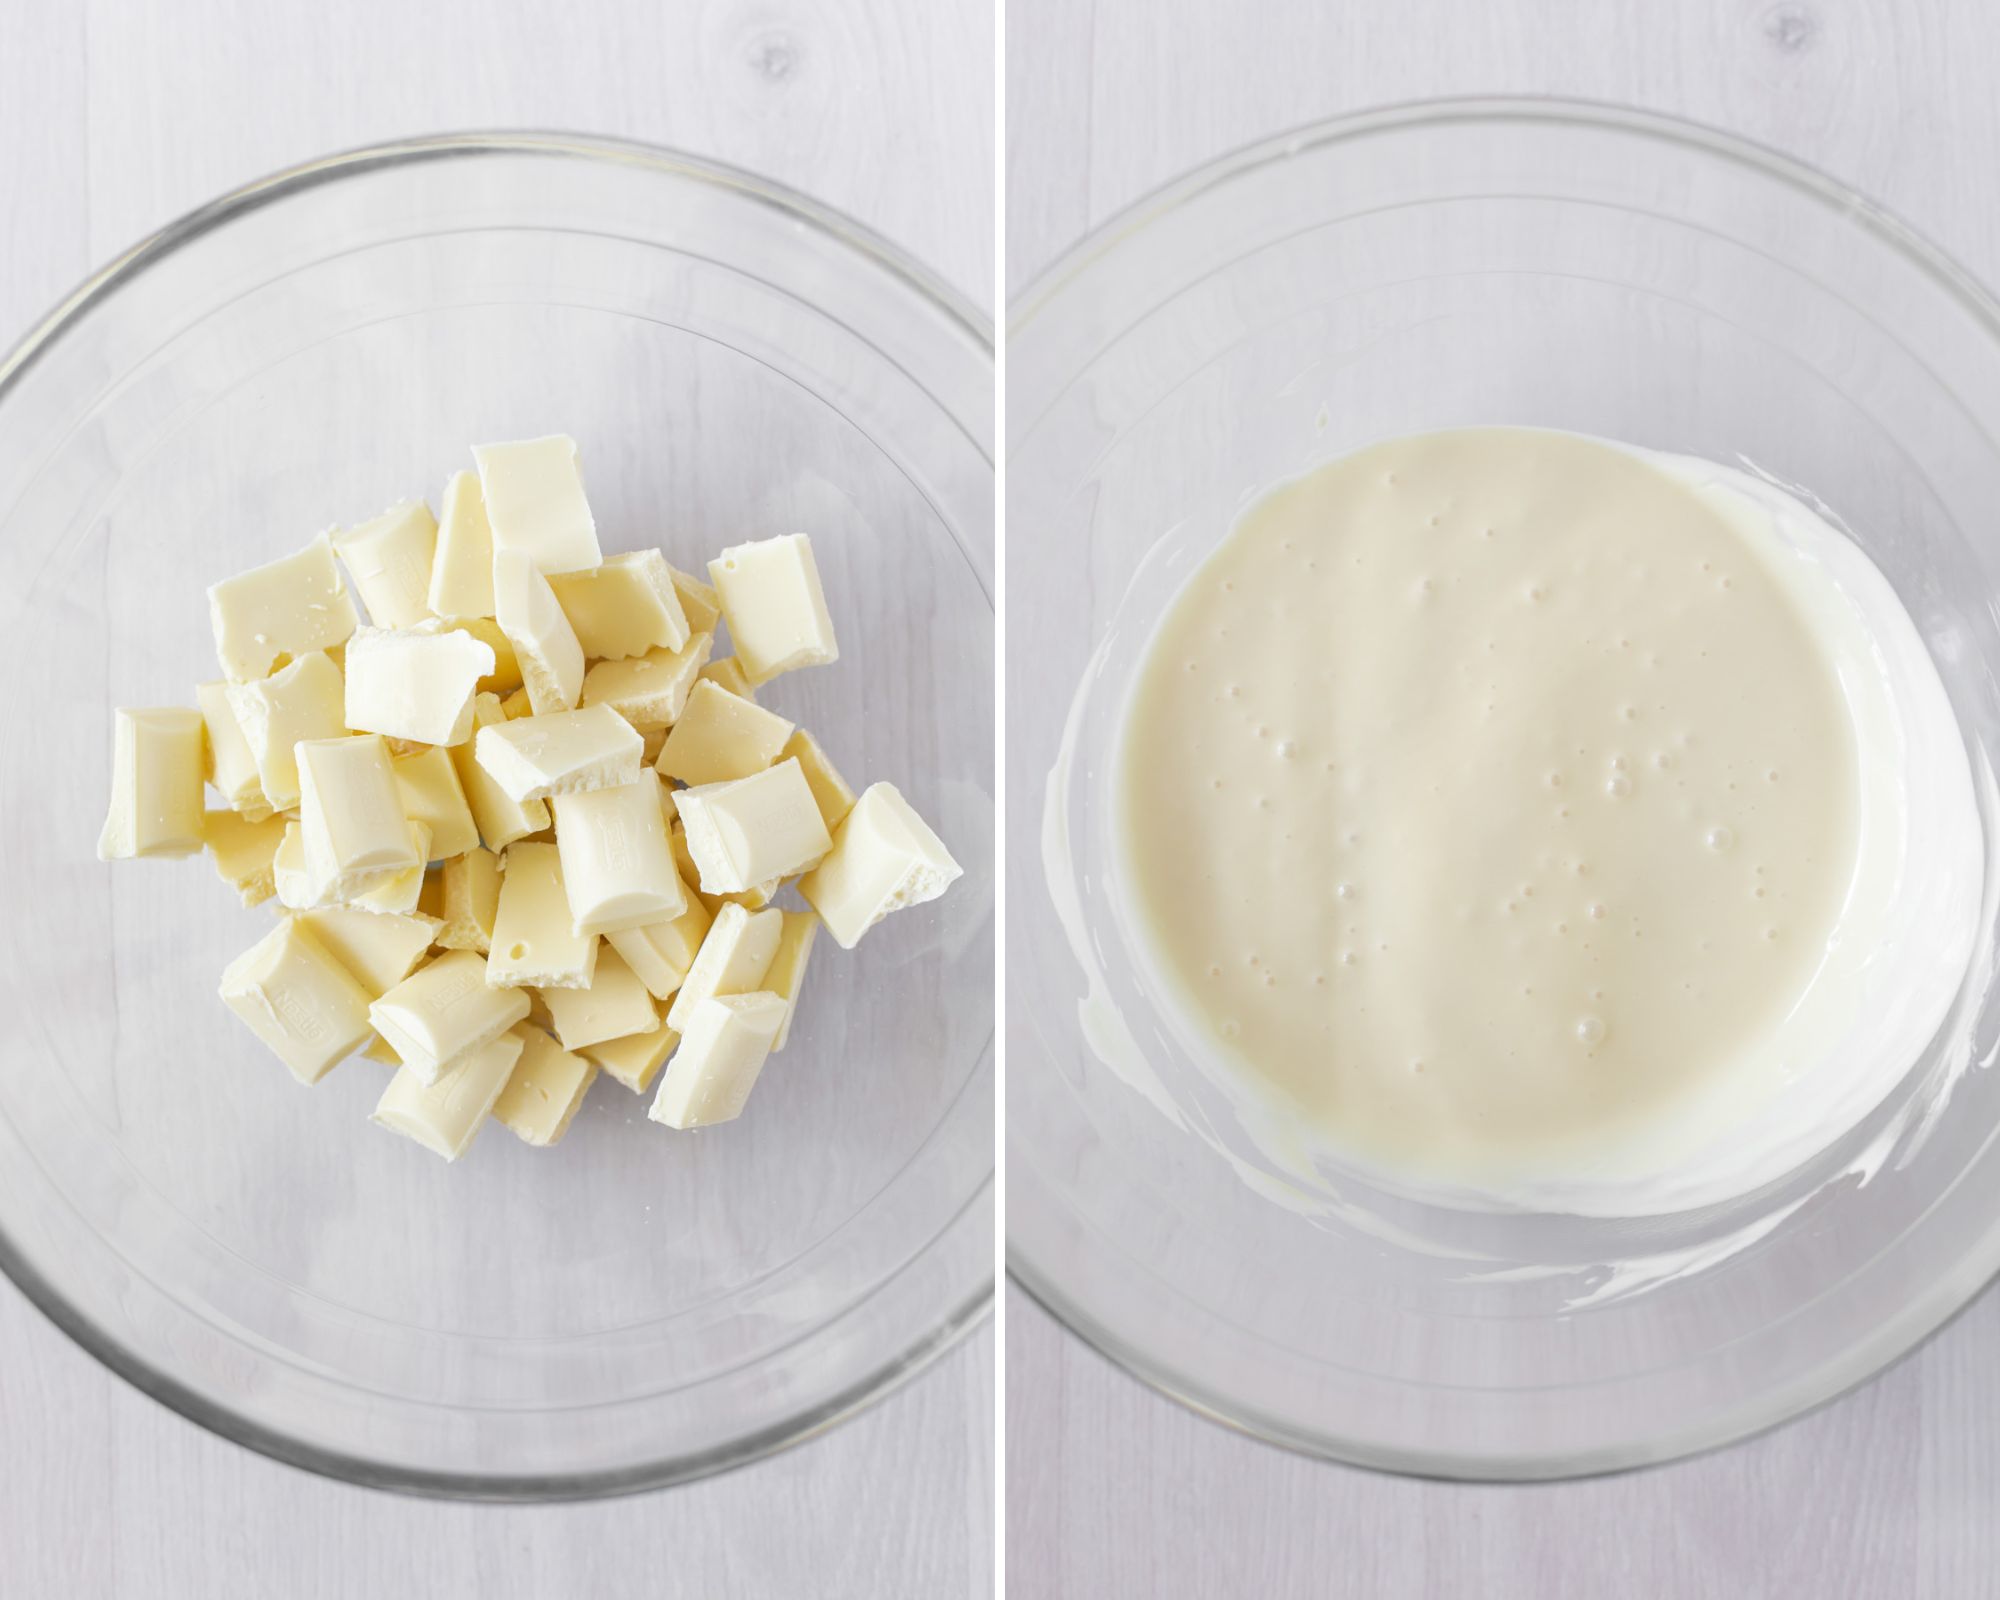 Block of white chocolate broken up in clear glass mixing bowl and melted in the bowl.